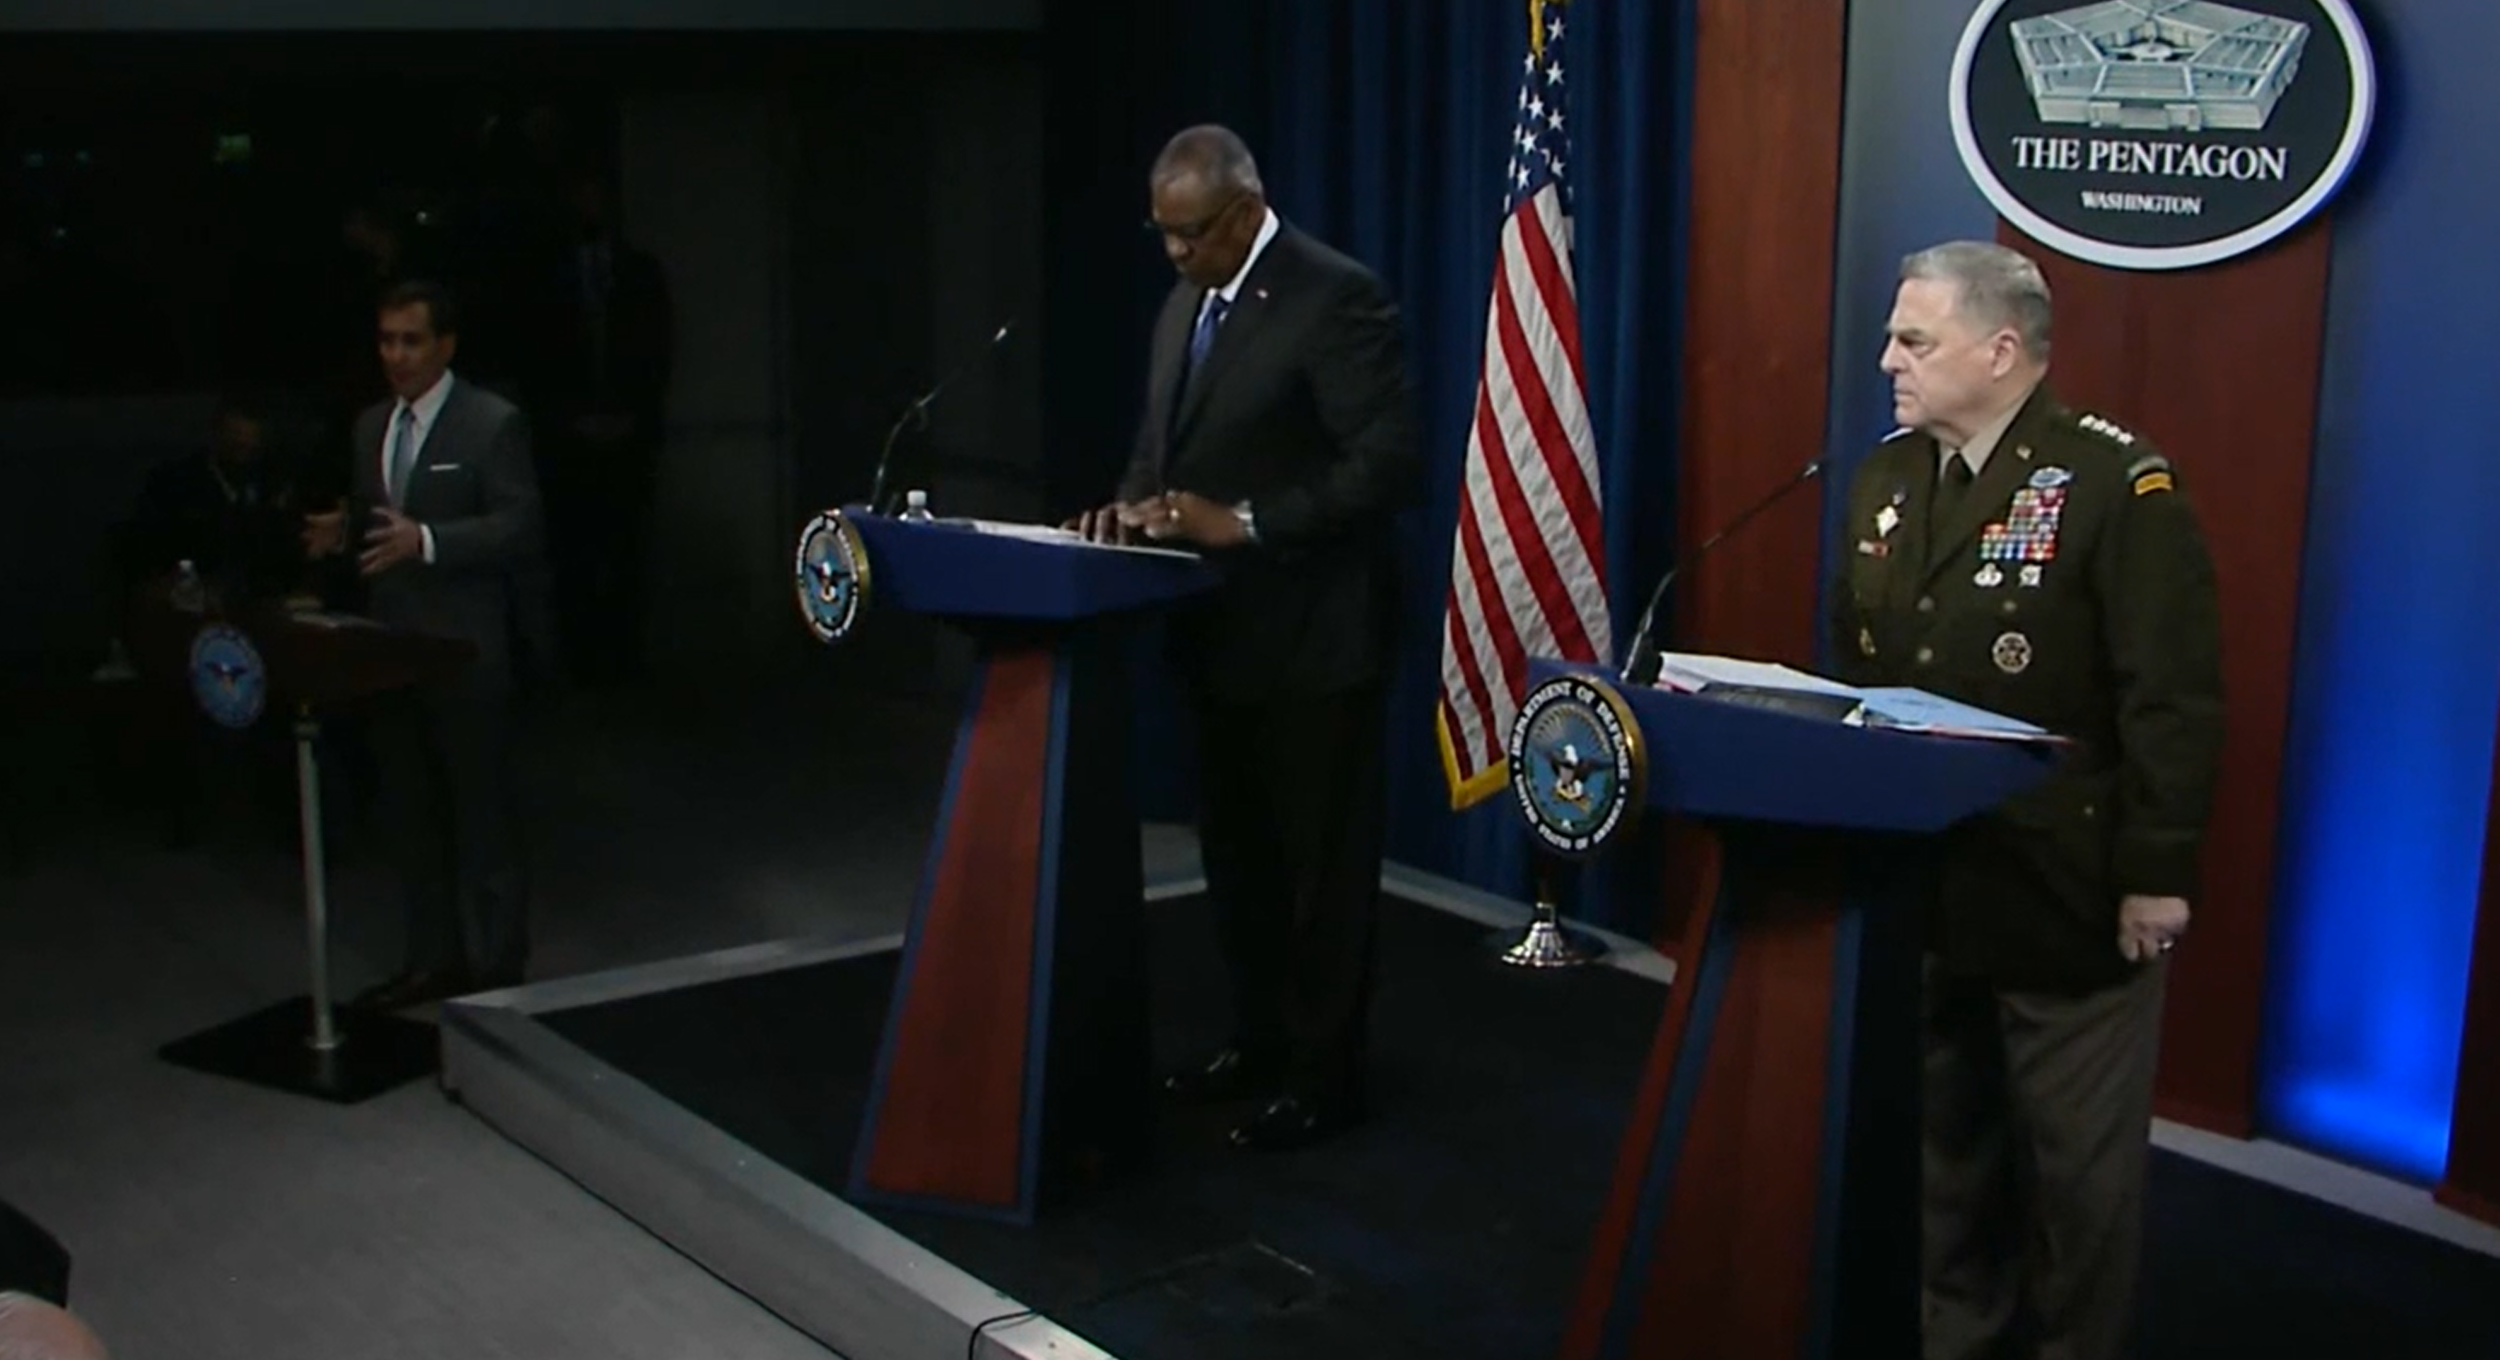 PICTURED: From left to right, Sec. of Defense Lloyd Austin, and Joint Chiefs Chair Gen. Mark Milley.